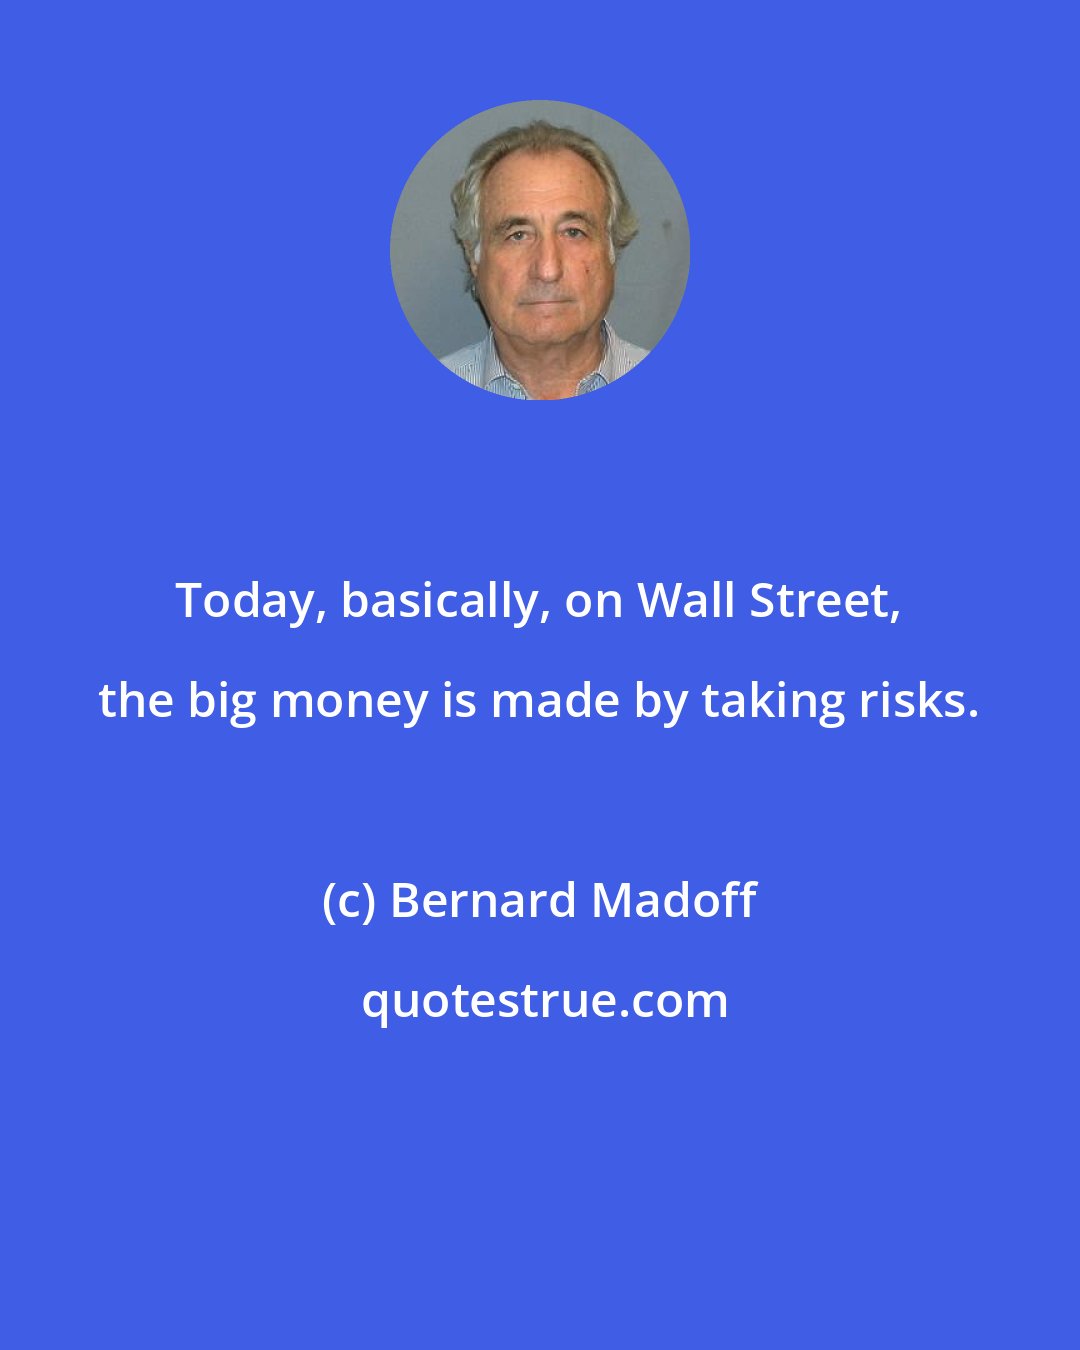 Bernard Madoff: Today, basically, on Wall Street, the big money is made by taking risks.